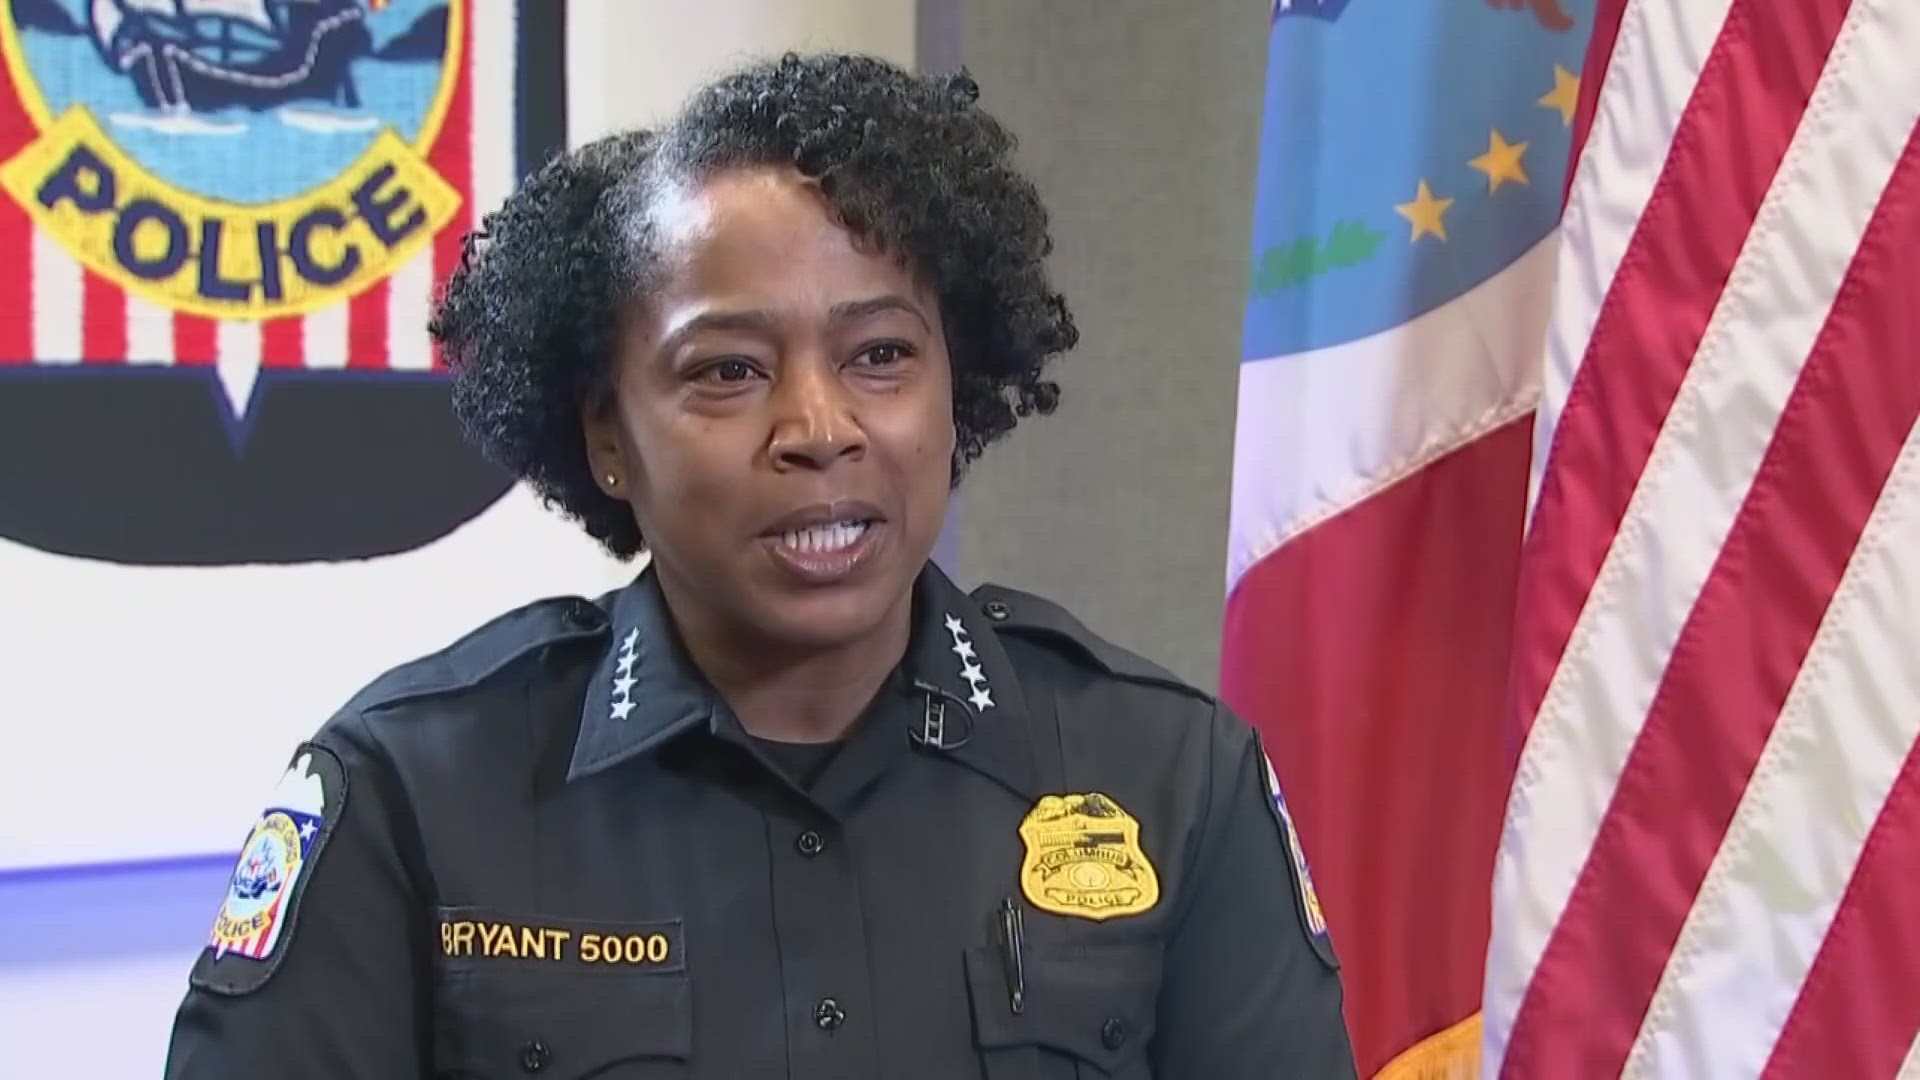 As students begin to relax for the summer, Columbus Police Chief Elaine Bryant says parents need to be involved with their kids to keep them out of trouble.